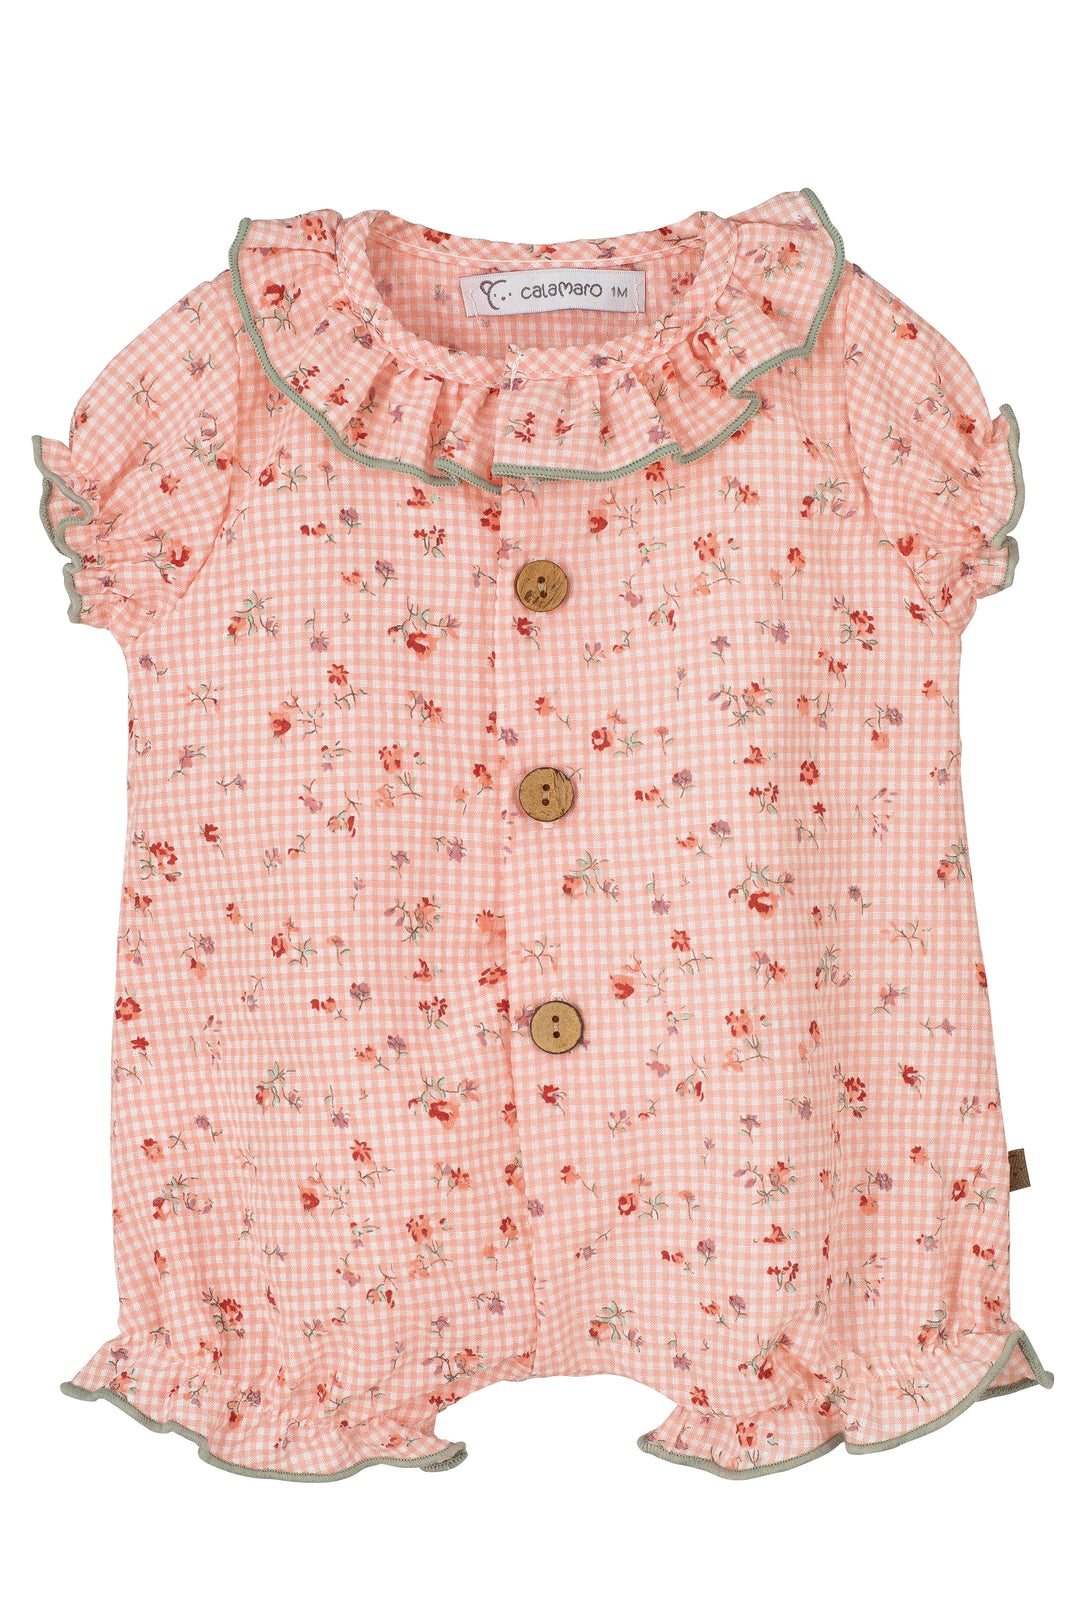 Calamaro PREORDER "Eloise" Coral Gingham Floral Shortie | Millie and John